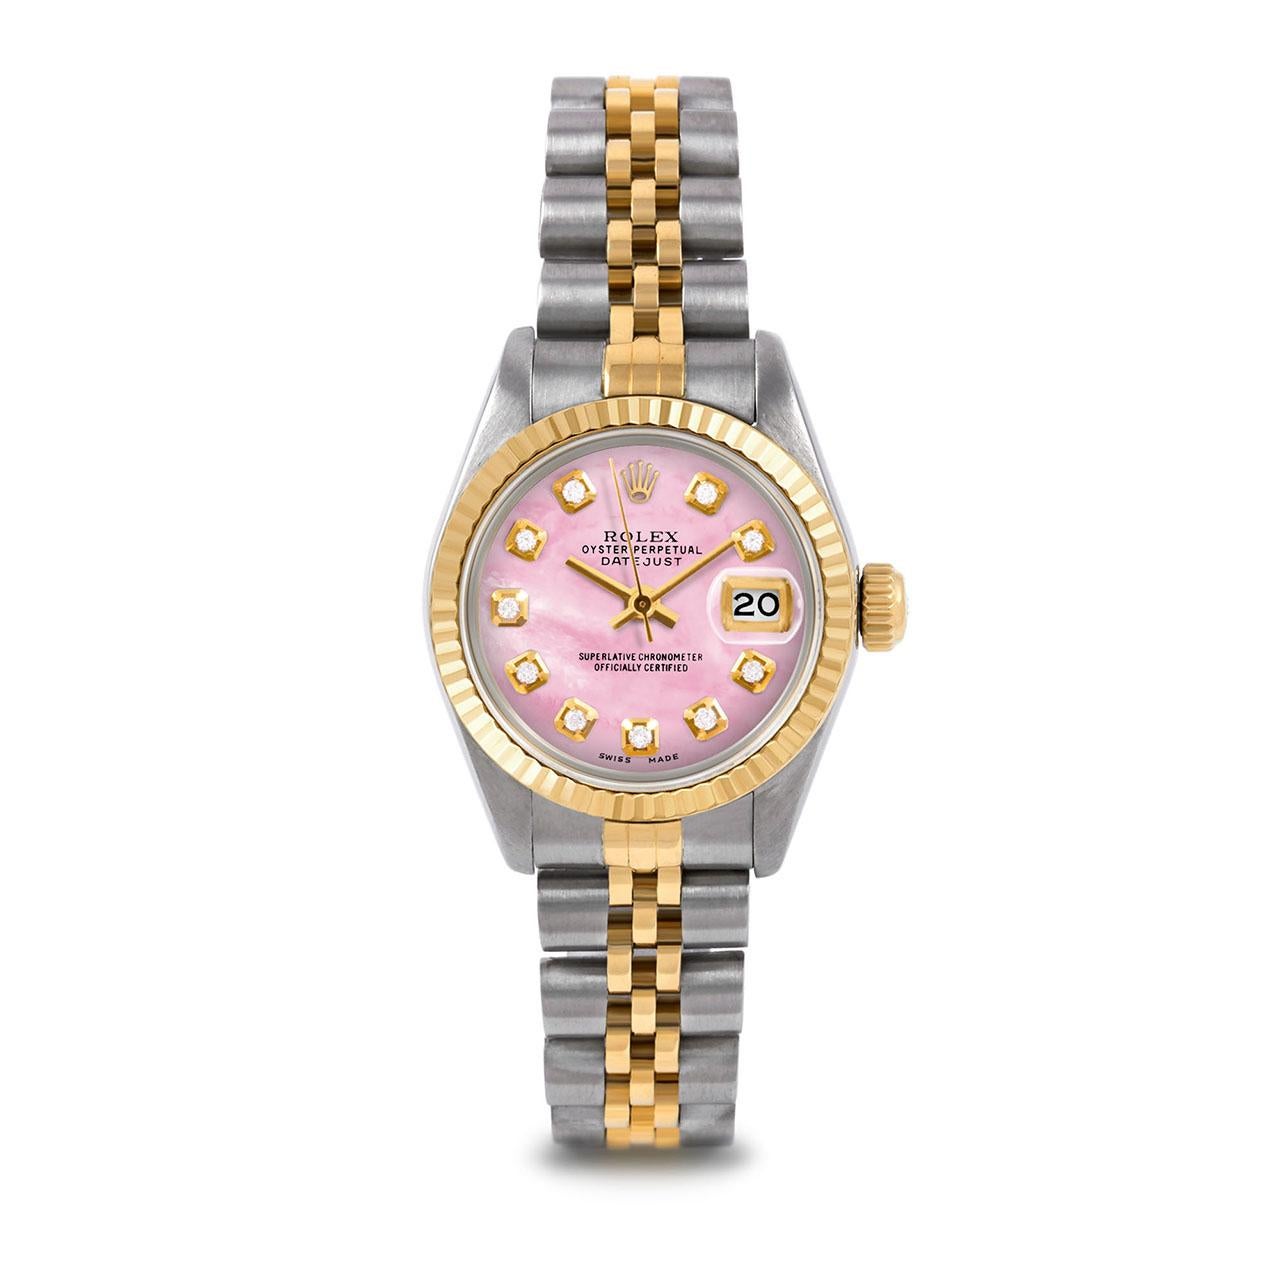 Pre-Owned Rolex 6917 Ladies 26mm Two Tone Datejust Watch, Custom Pink Mother of Pearl Diamond Dial & Fluted Bezel on Rolex 14K Yellow Gold And Stainless Steel Jubilee Band.   

SKU 6917-TT-PMOP-DIA-AM-FLT-JBL


Brand/Model:        Rolex